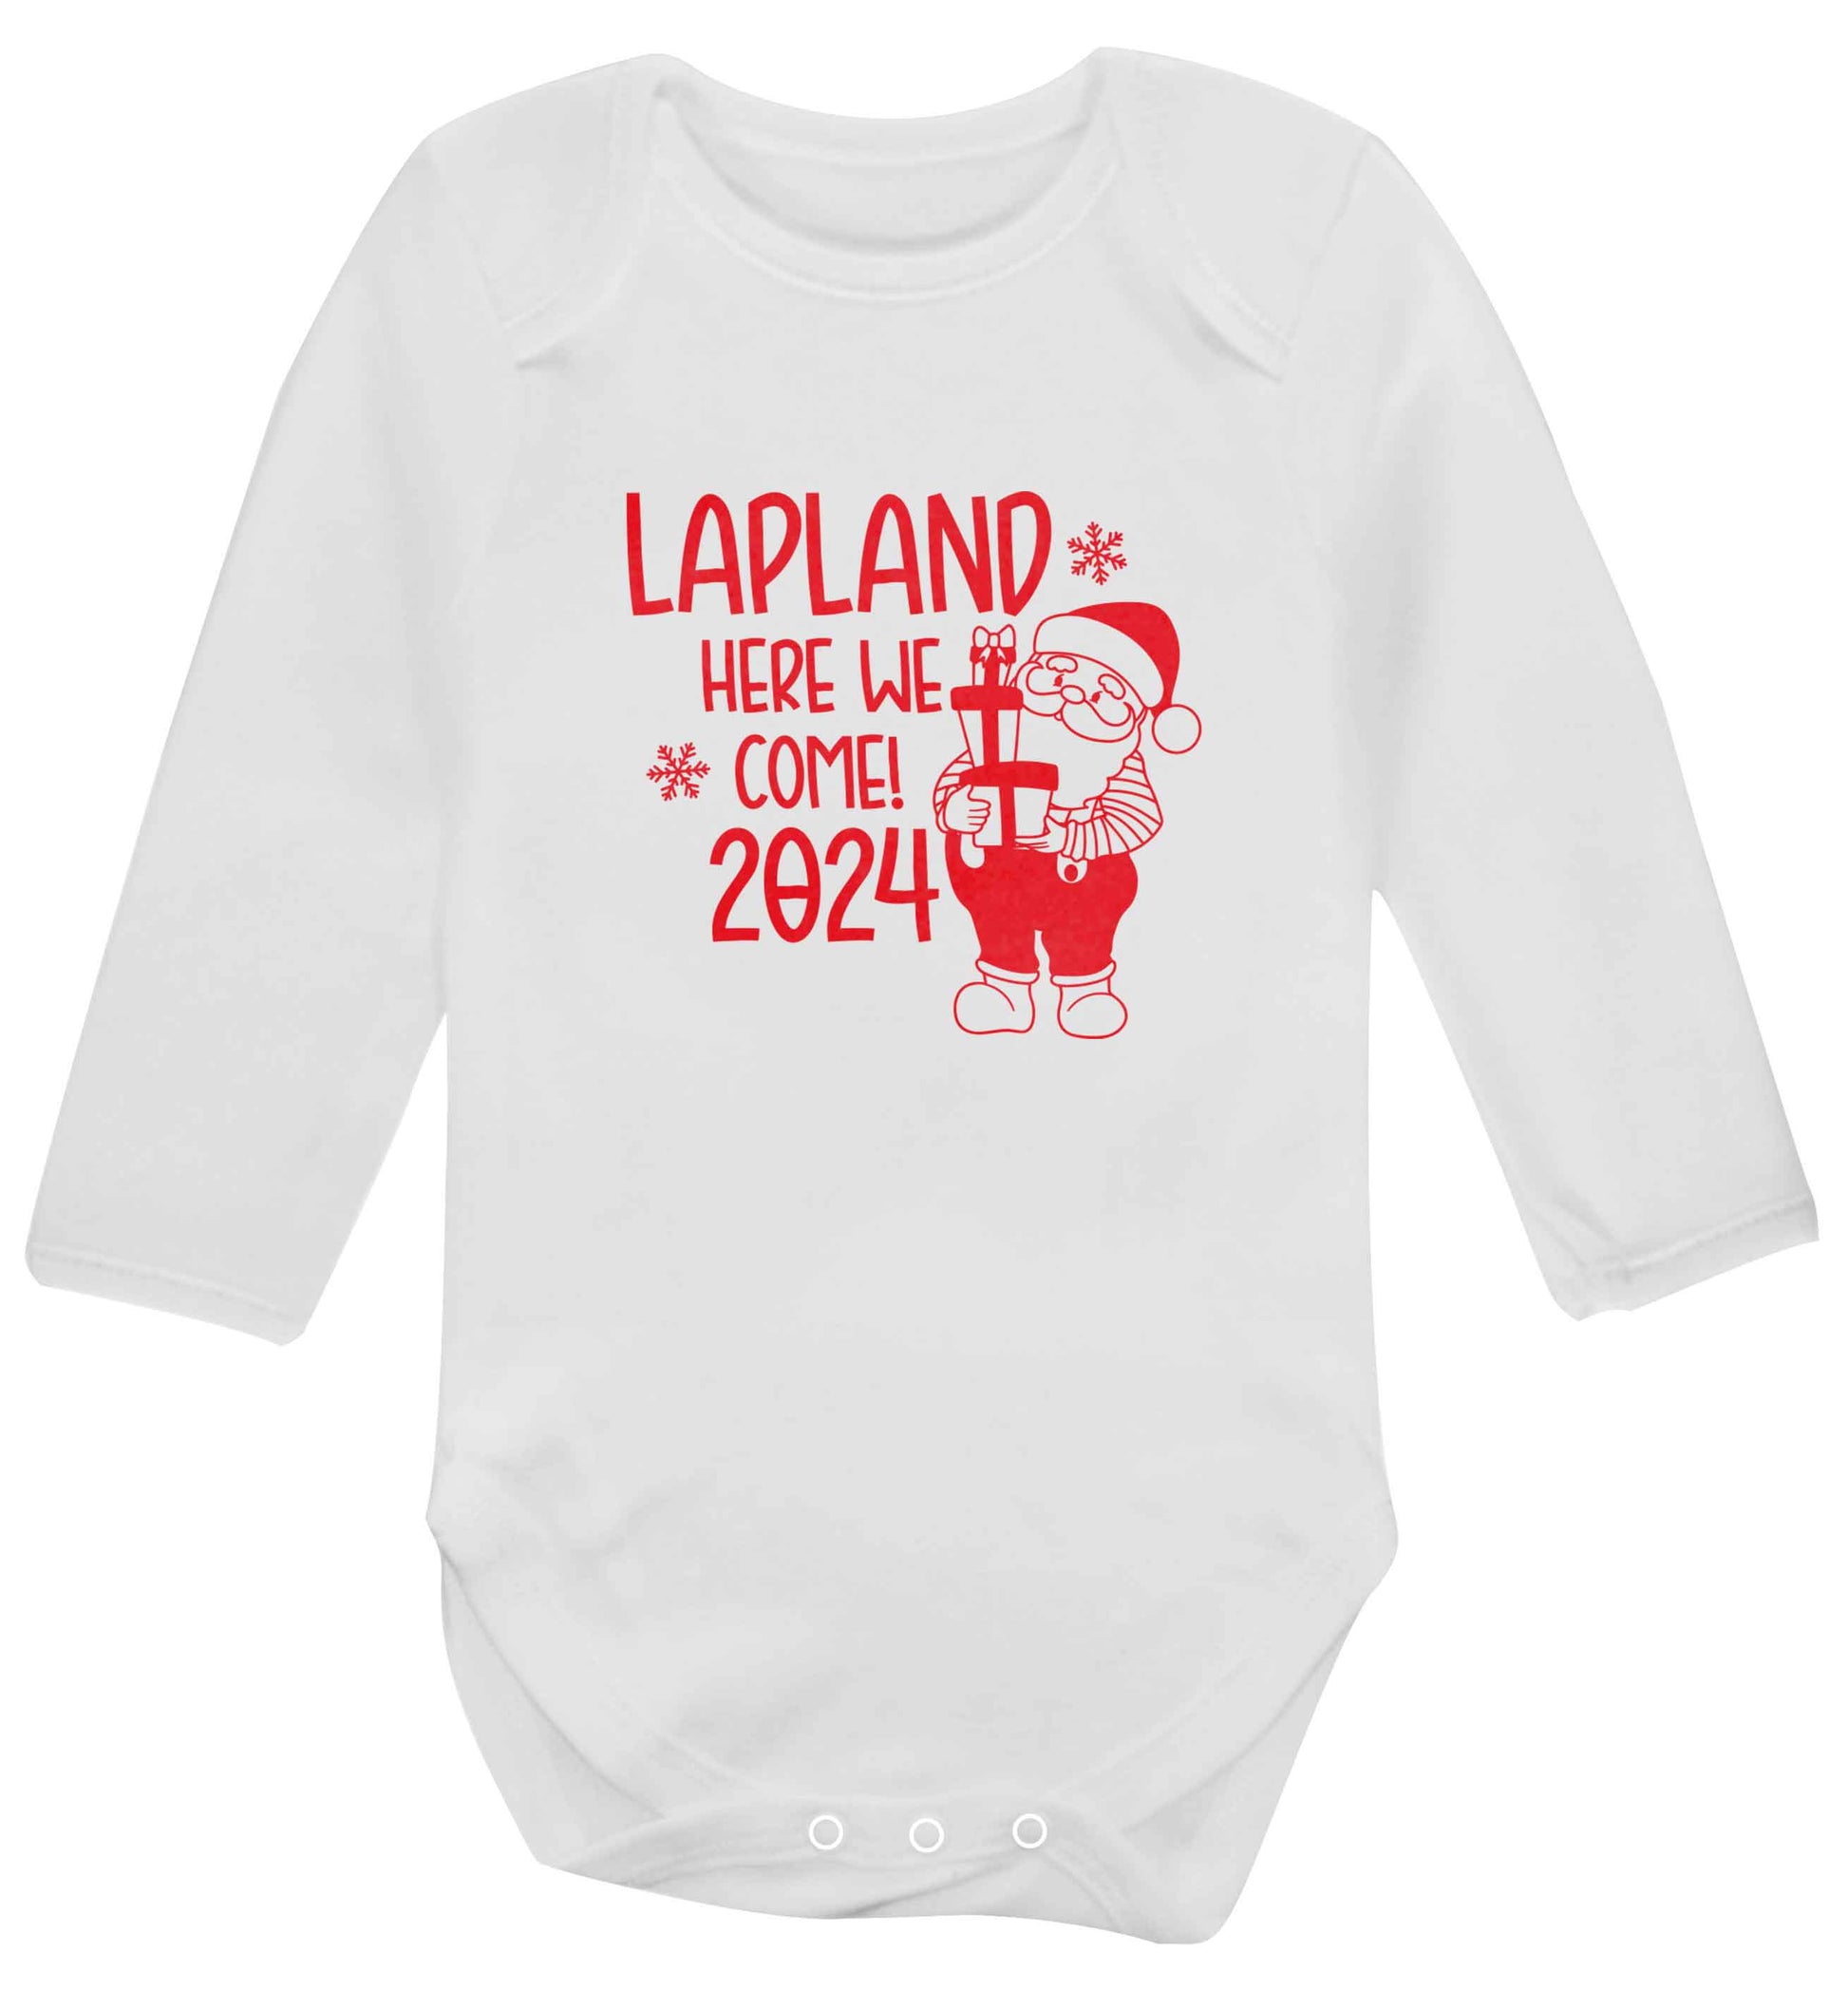 Lapland here we come baby vest long sleeved white 6-12 months